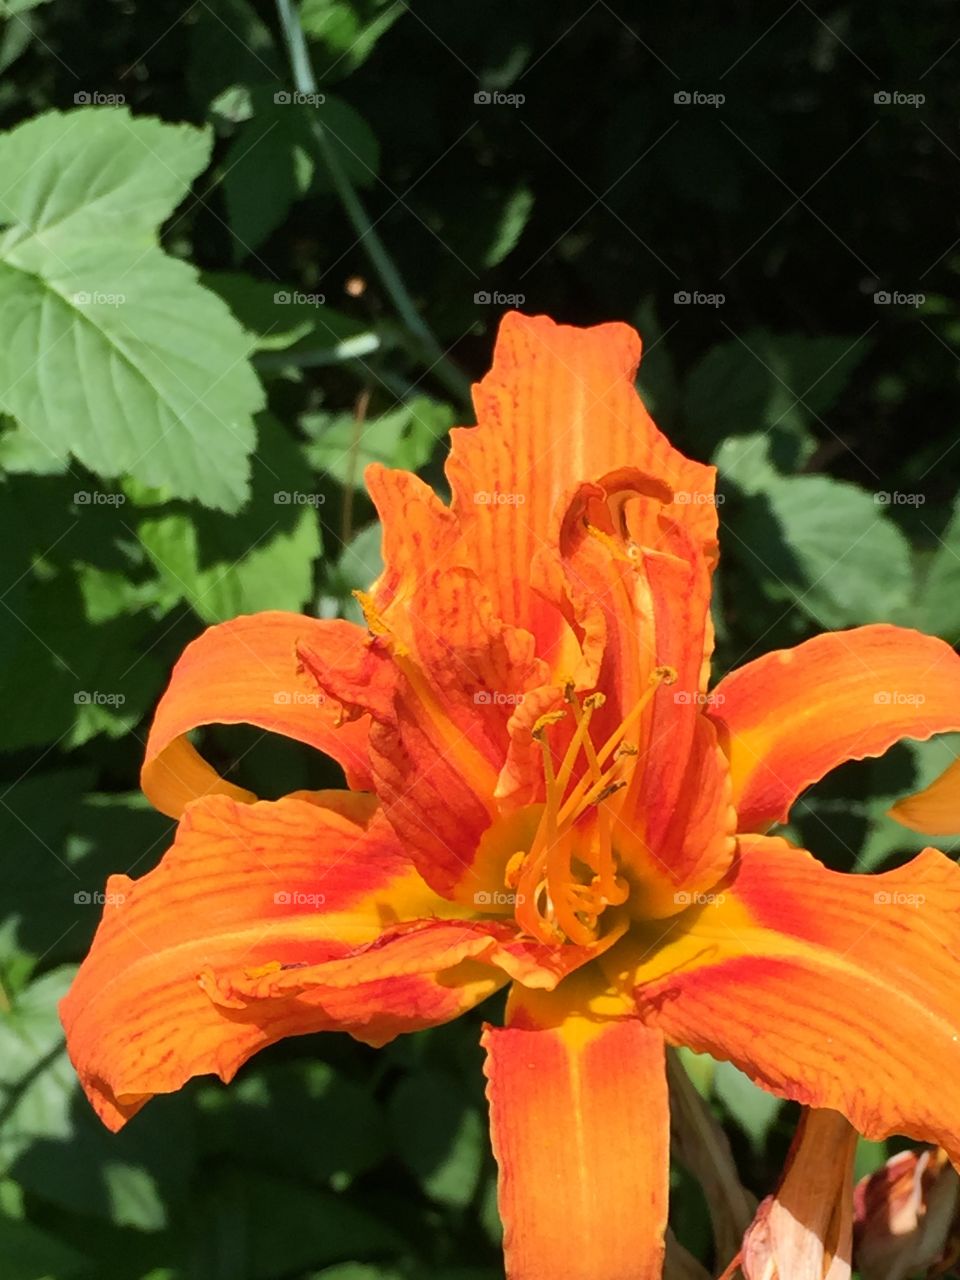 Tiger Lily. A common flower in Pennsylvania.